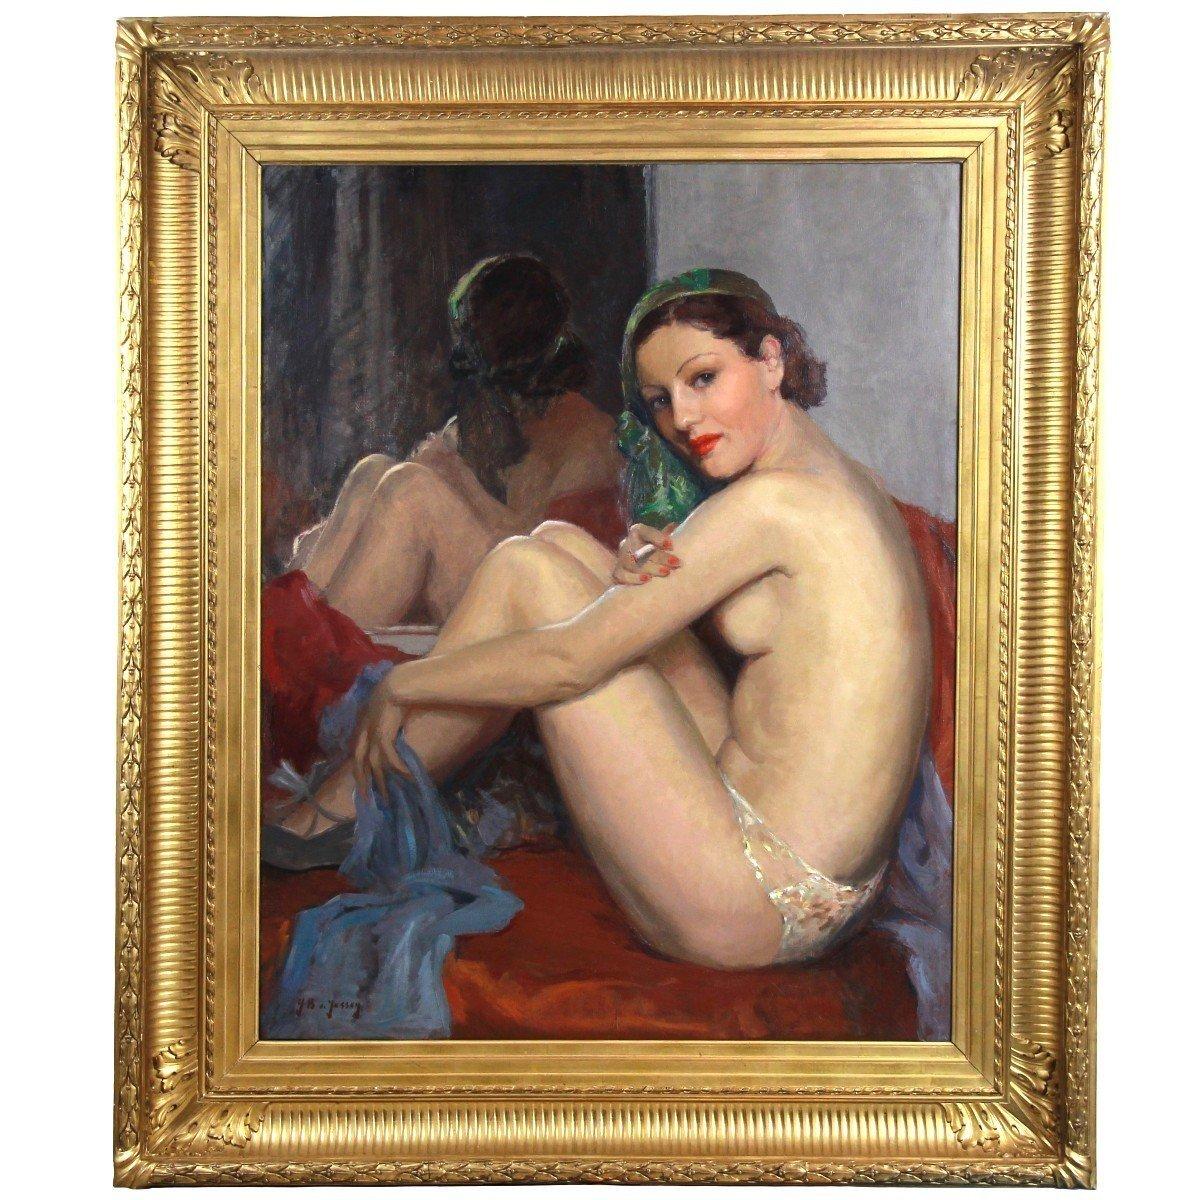 Very beautiful work oil on canvas, depicting a beautiful cabaret dancer
smoking a cigarette in front of a mirror.
Large dimensions of the canvas.

The frame is not sold with the painting because it is slightly too large by a few mm (can be solved by